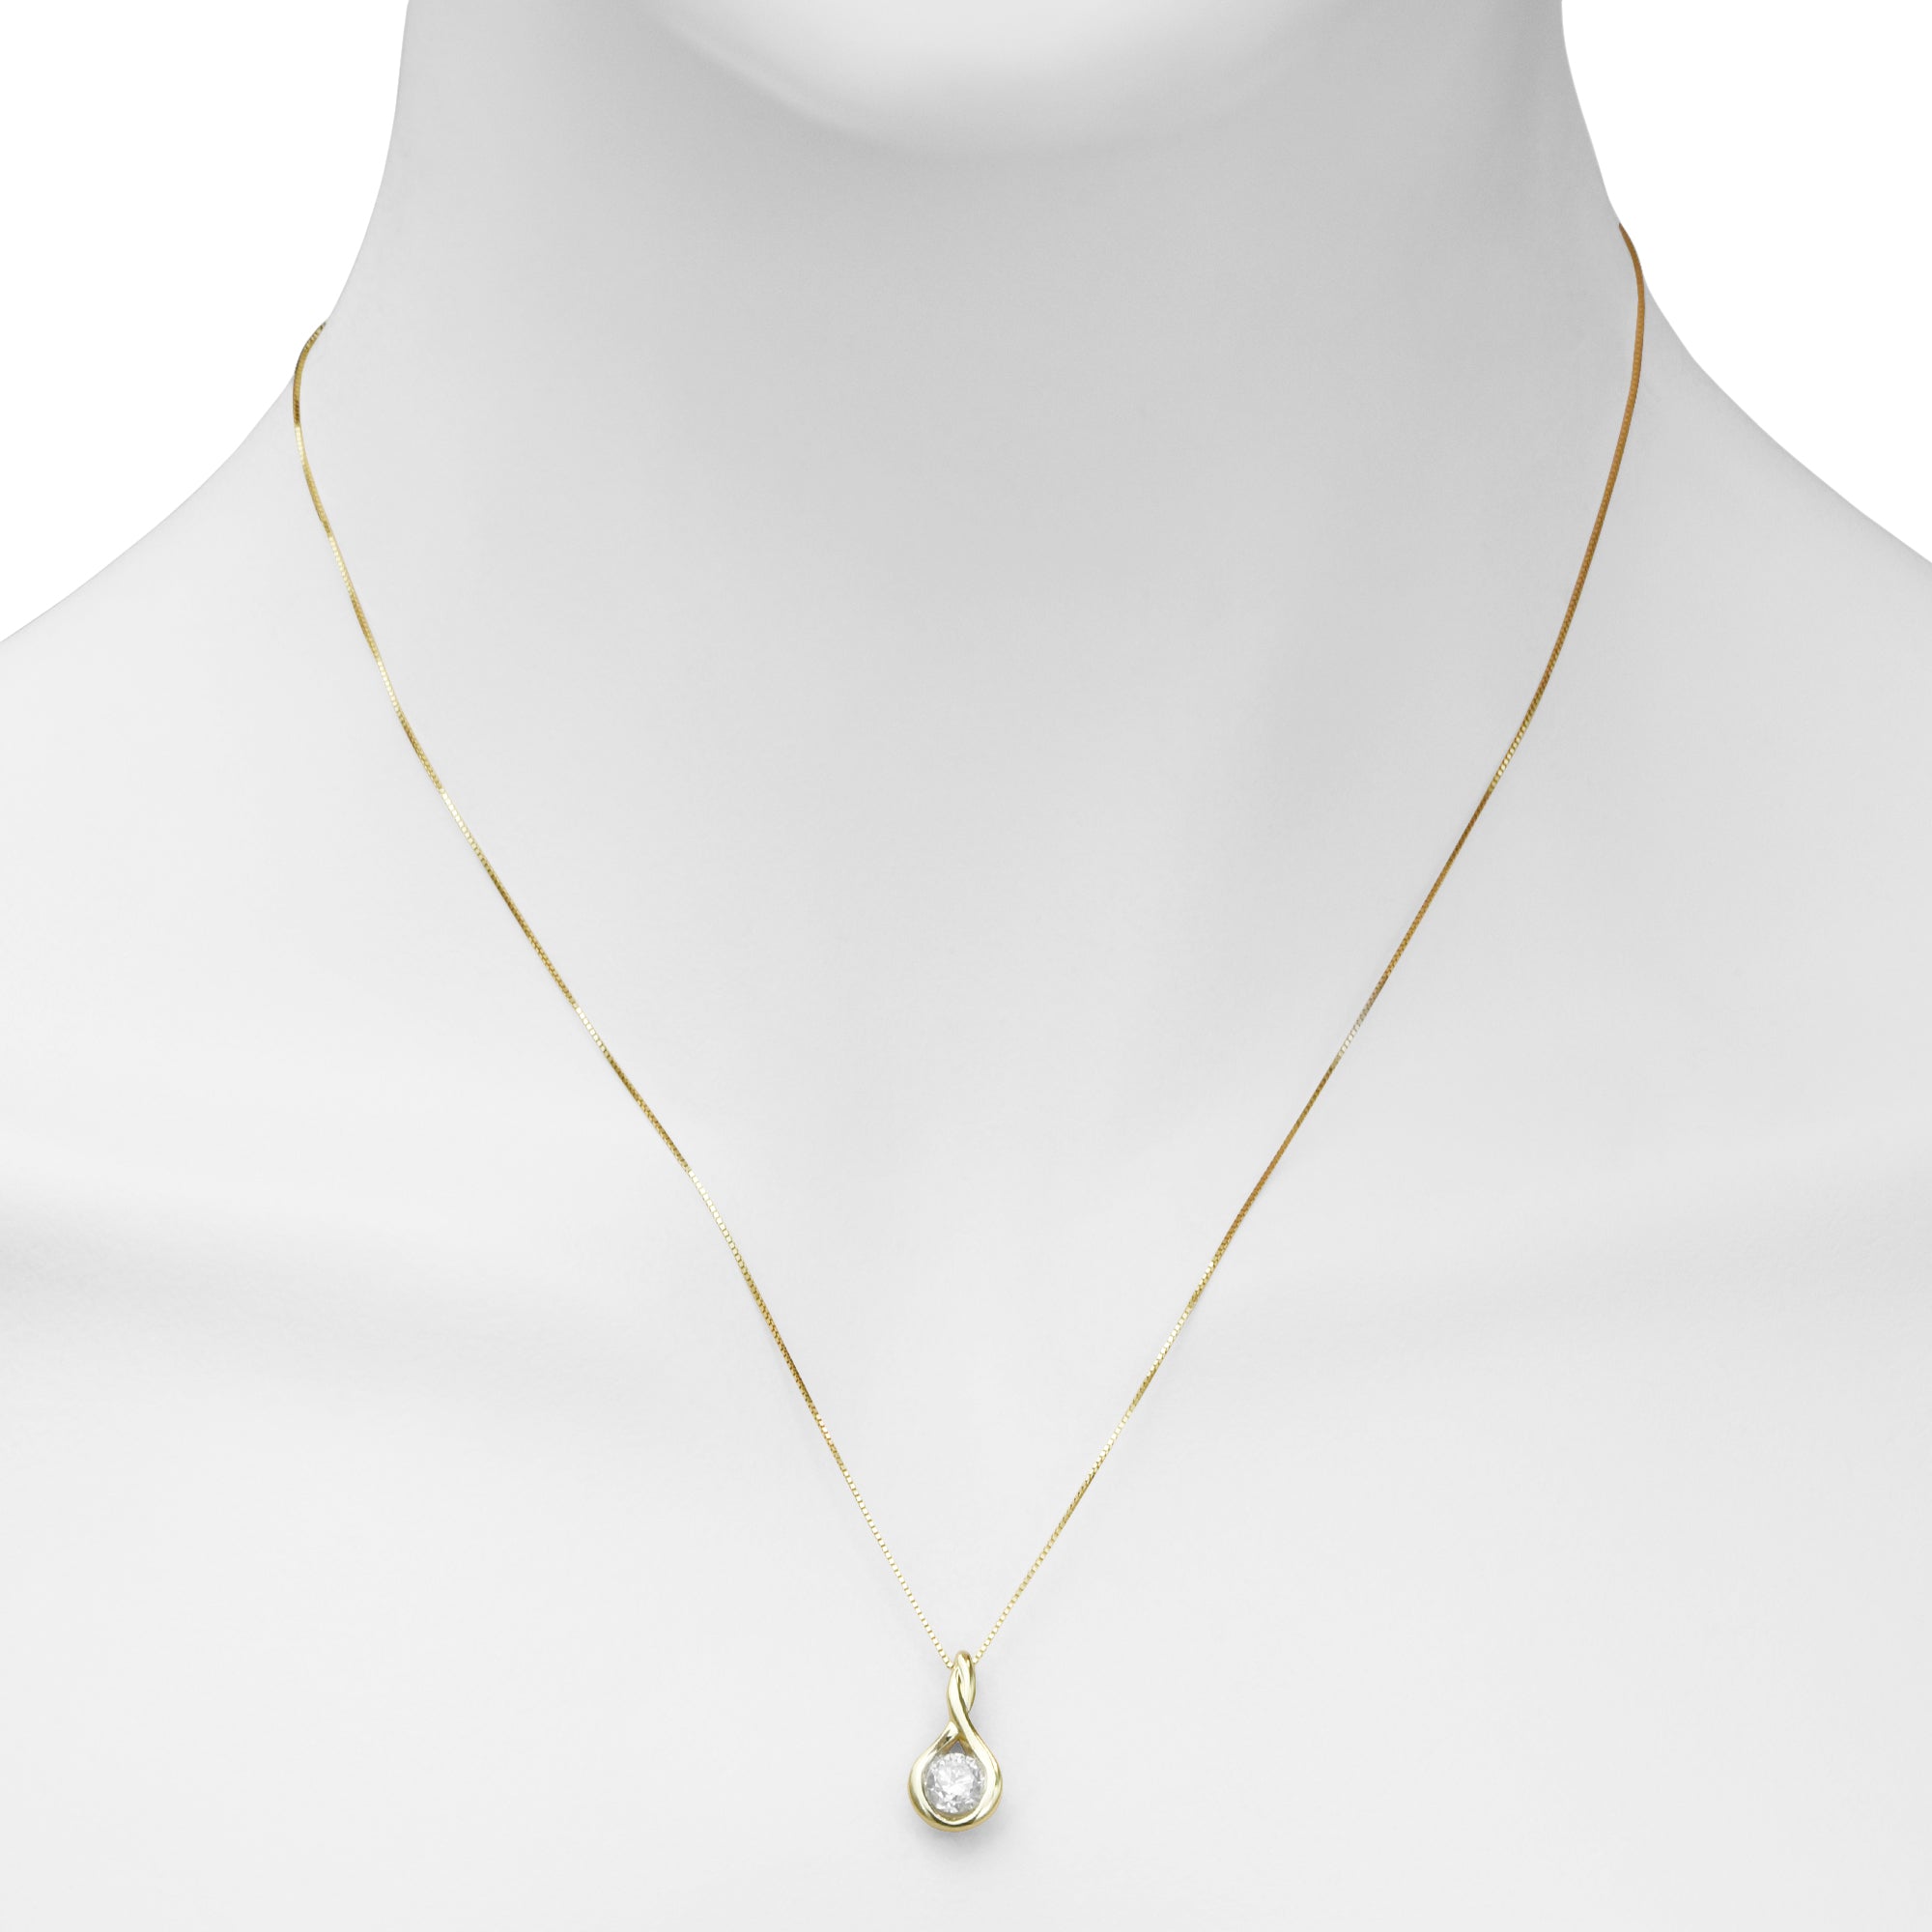 Diamond Necklace in 14kt Yellow Gold (3/4ct)